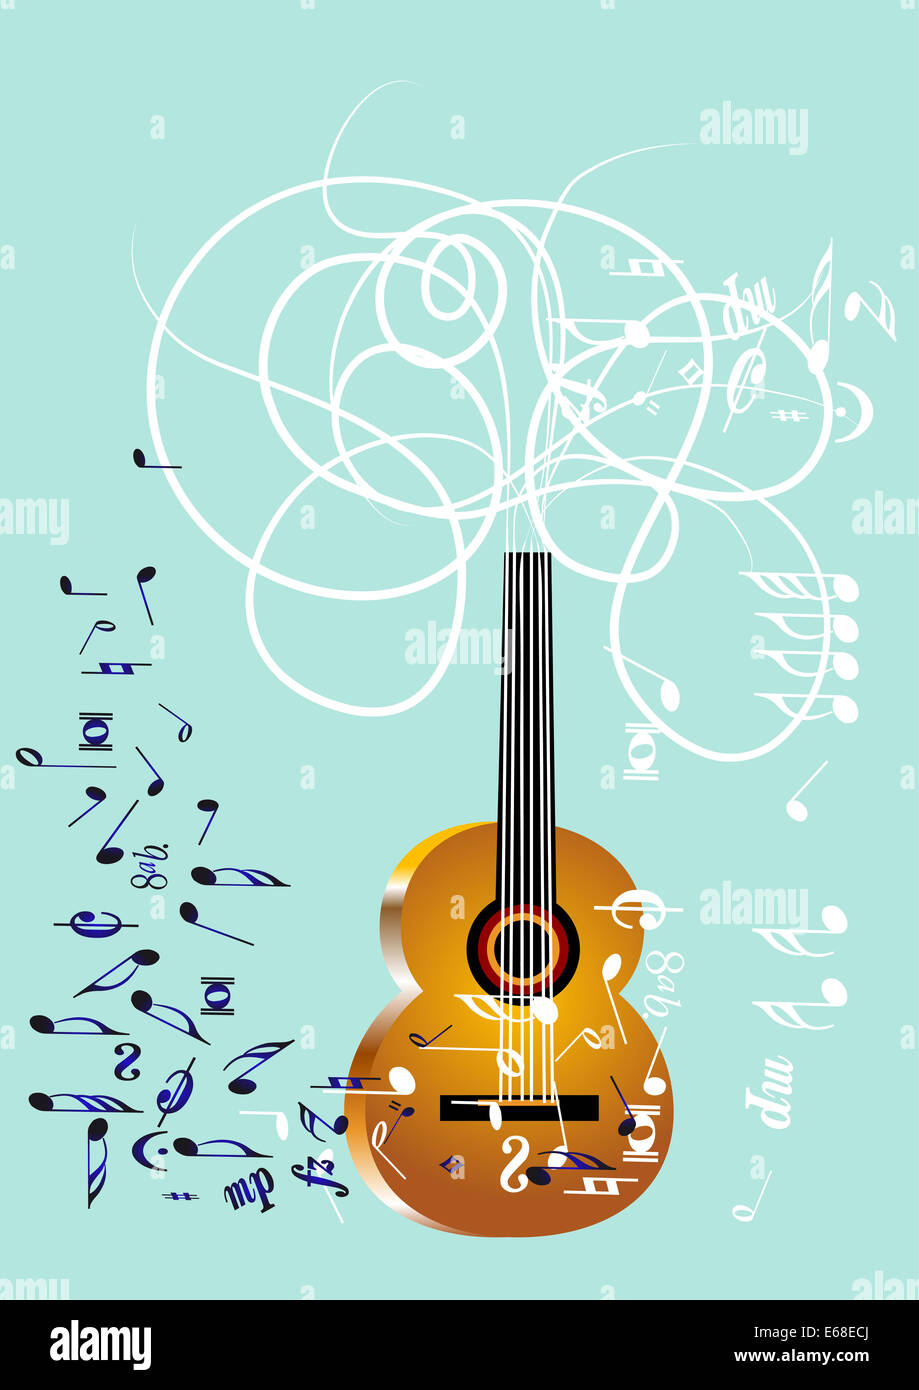 musical background with guitar and notes Stock Photo